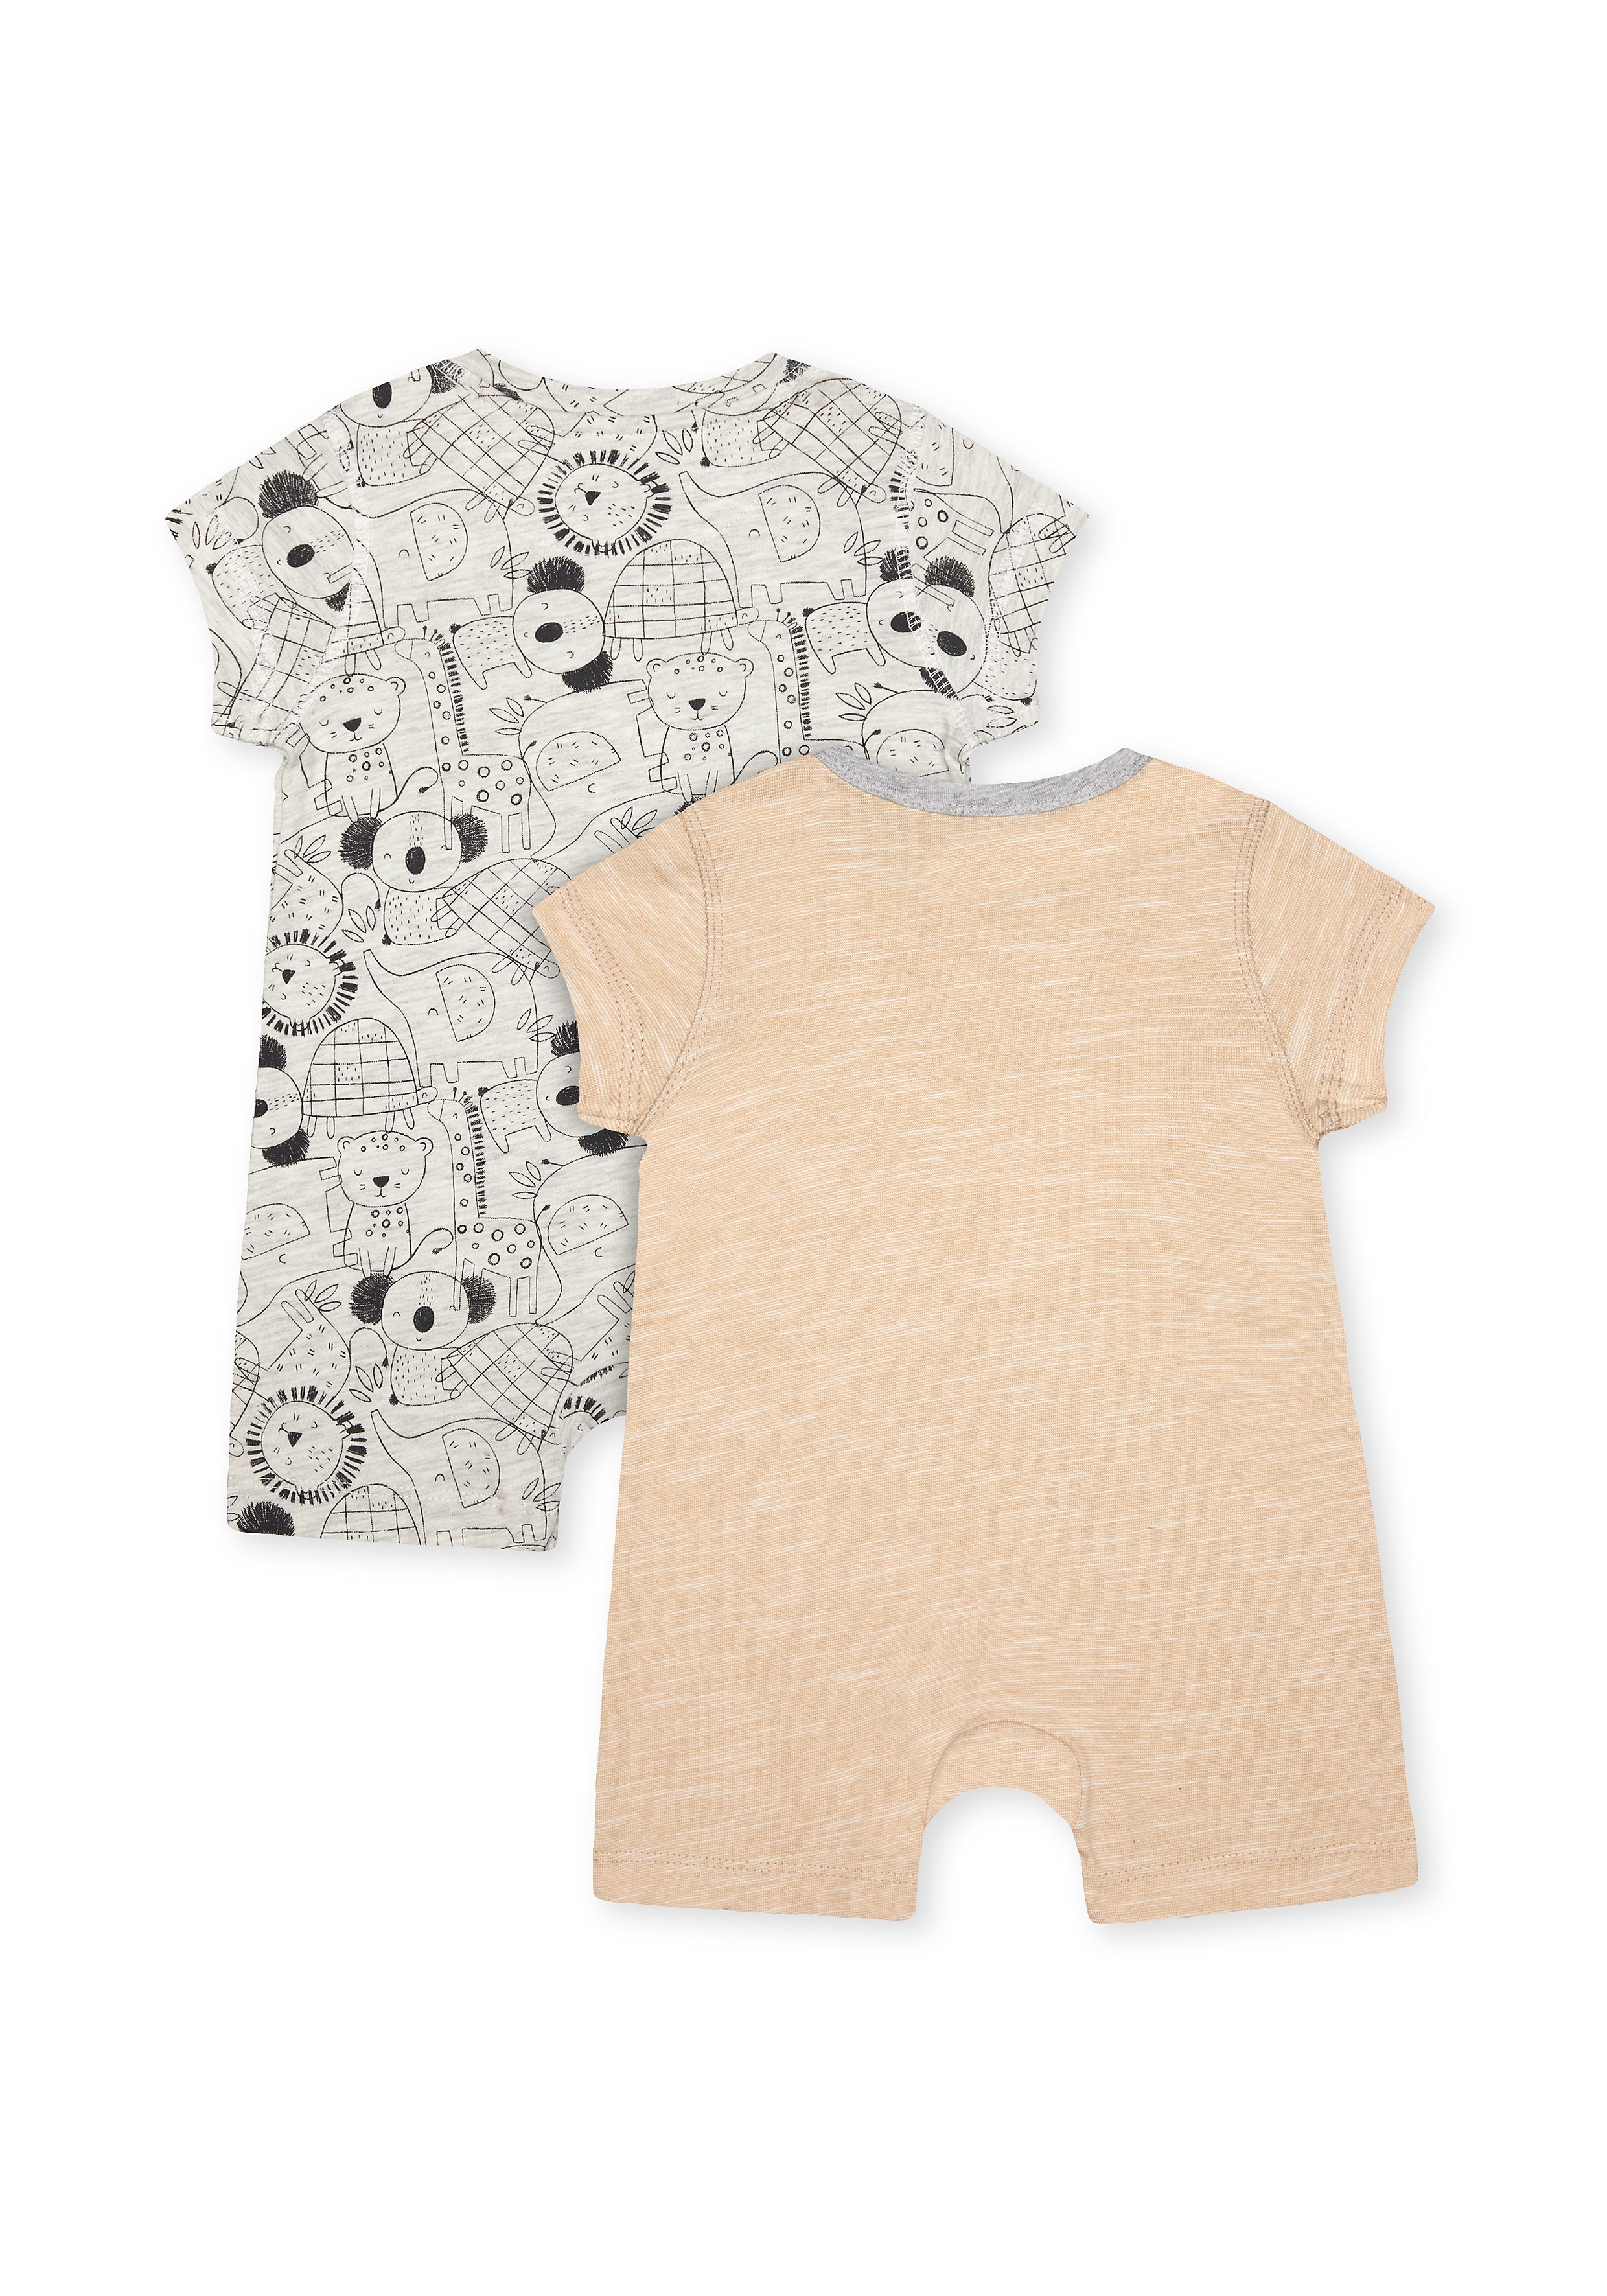 Mothercare | Boys Half Sleeves Rompers  - Pack Of 2 - Multicolor 1